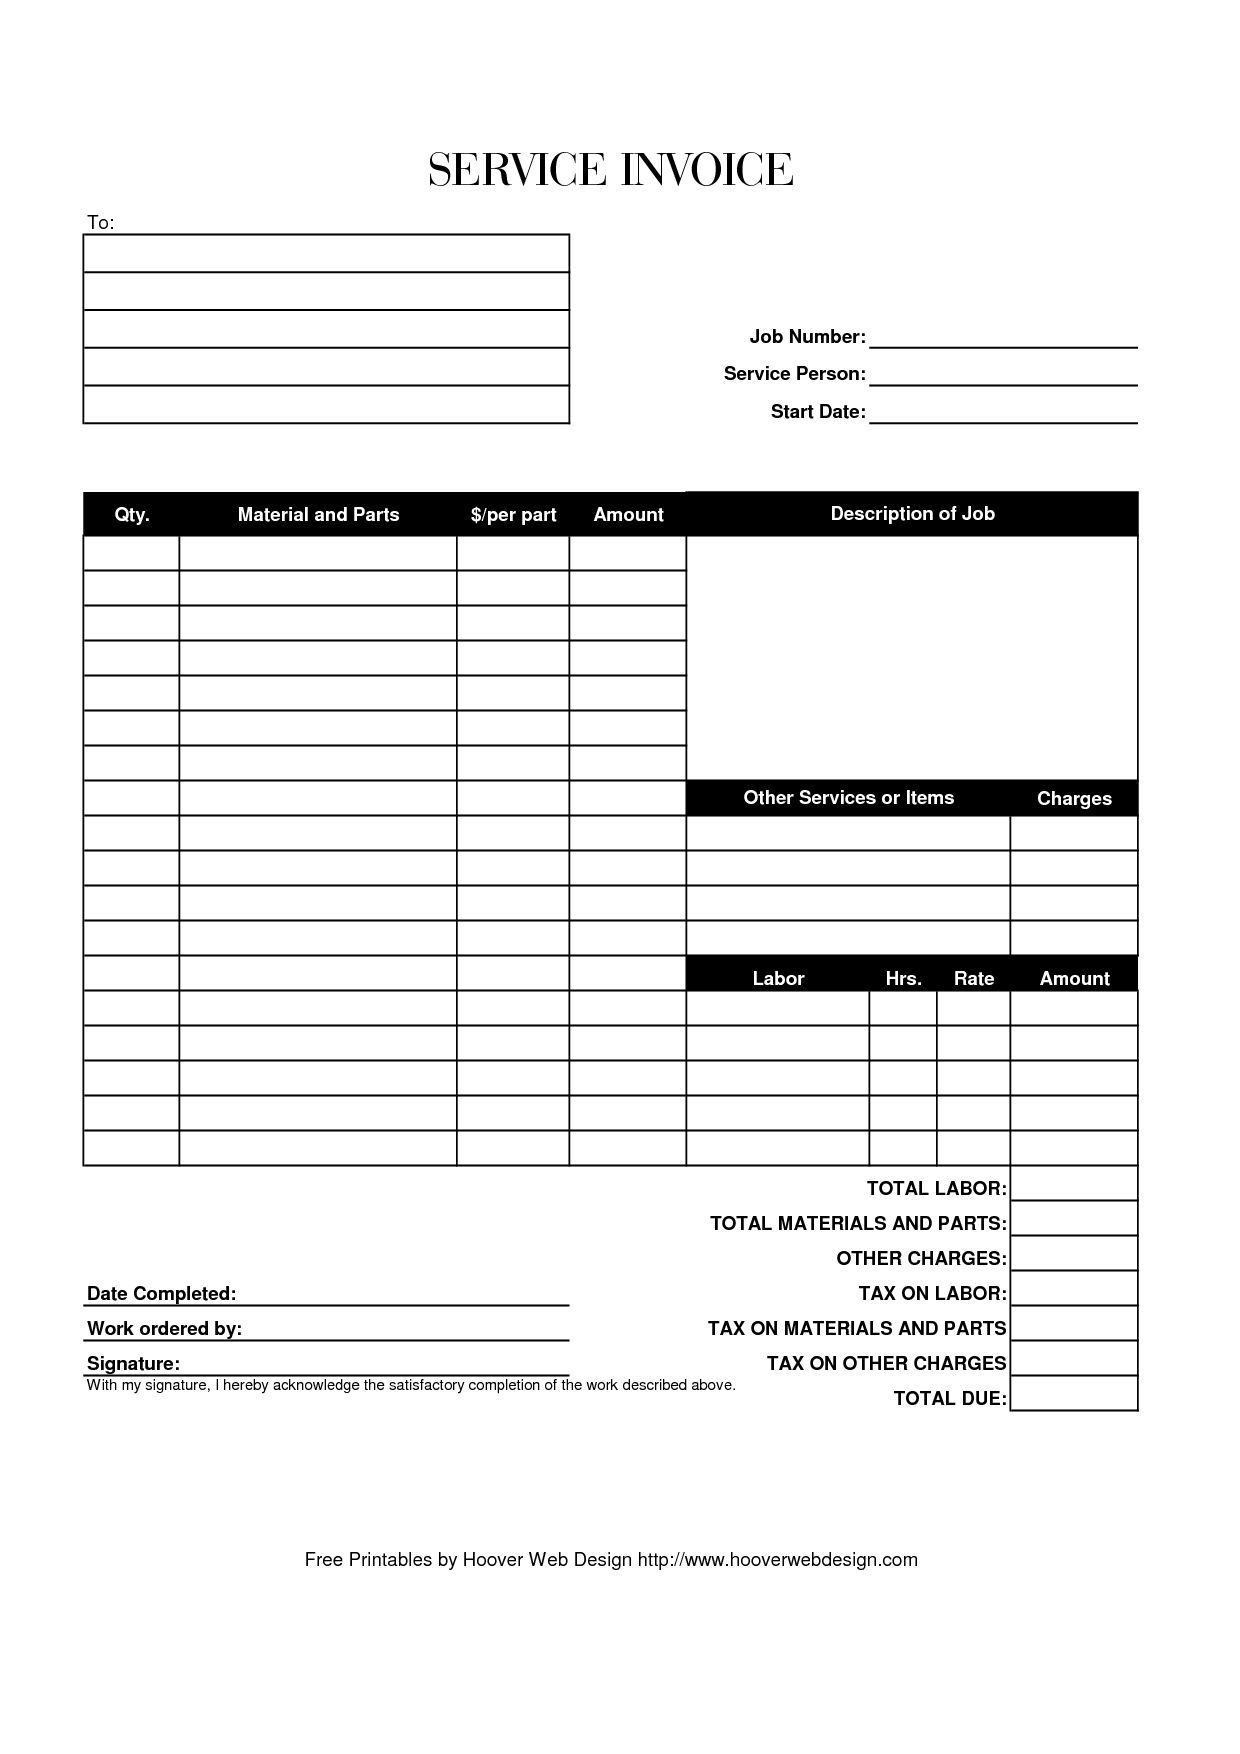 Free Invoices Printable And Editable * Invoice Template Ideas